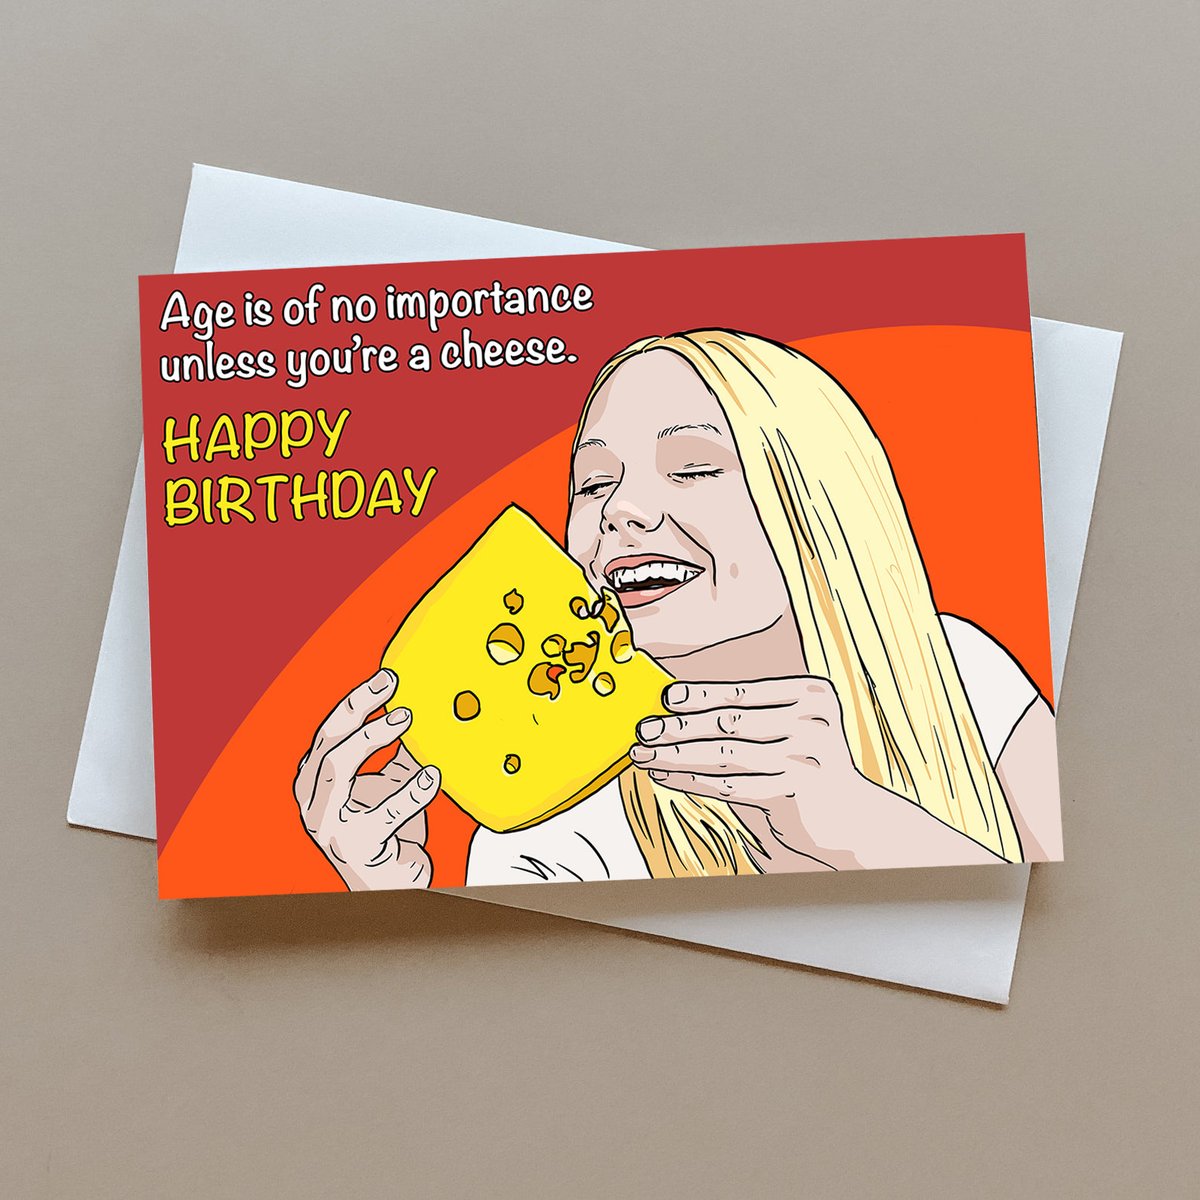 Funny birthday card, 'Age is of no importance unless you're a cheese', Cheesy card, humorous card, birthday meme, birthday card, cheese card tuppu.net/154fe14f #Artwork #GiftIdeas #GreetingCards #BirthdayCard